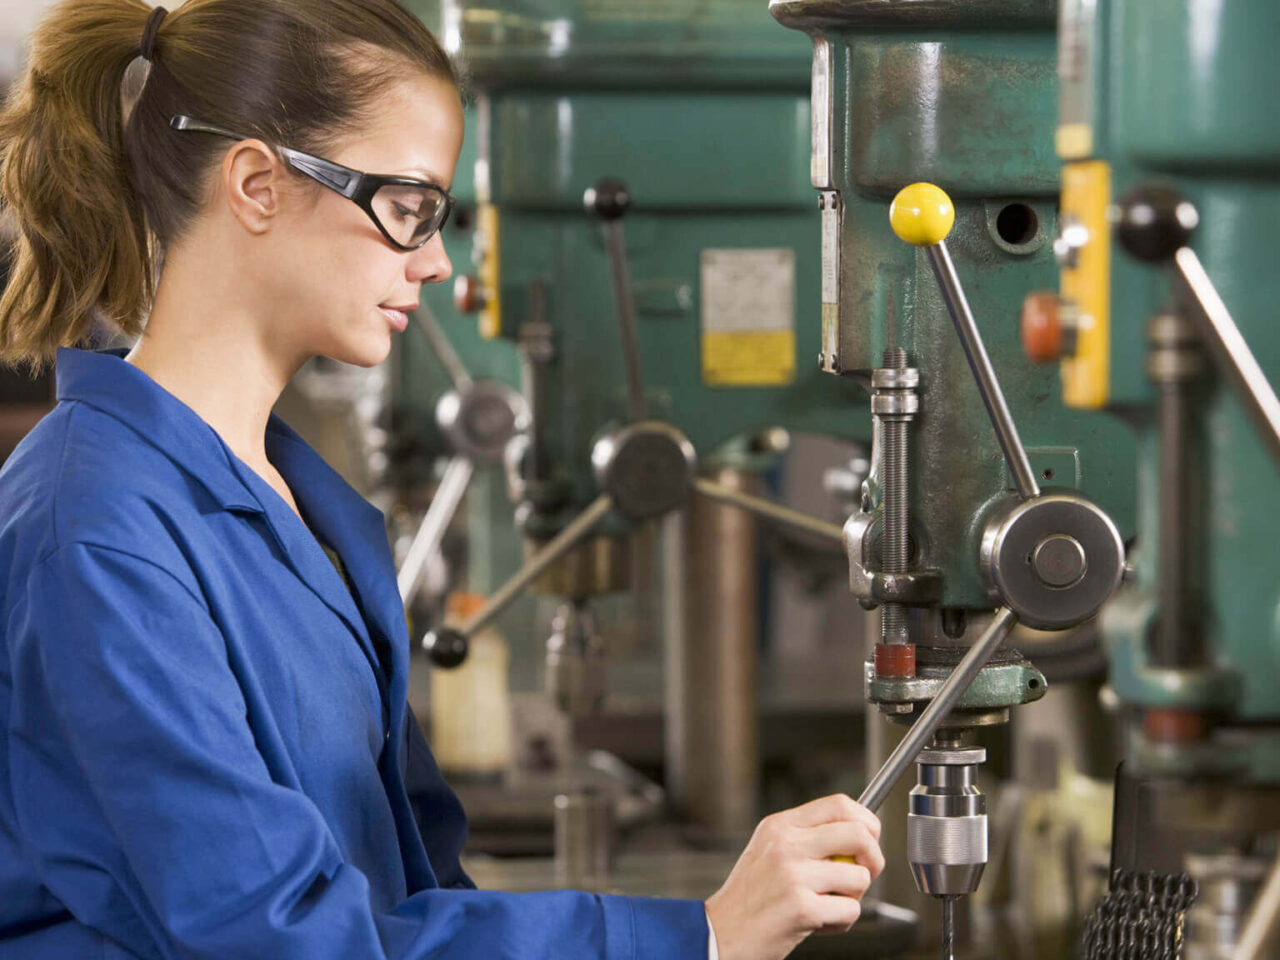 Female factory worker operating machinery